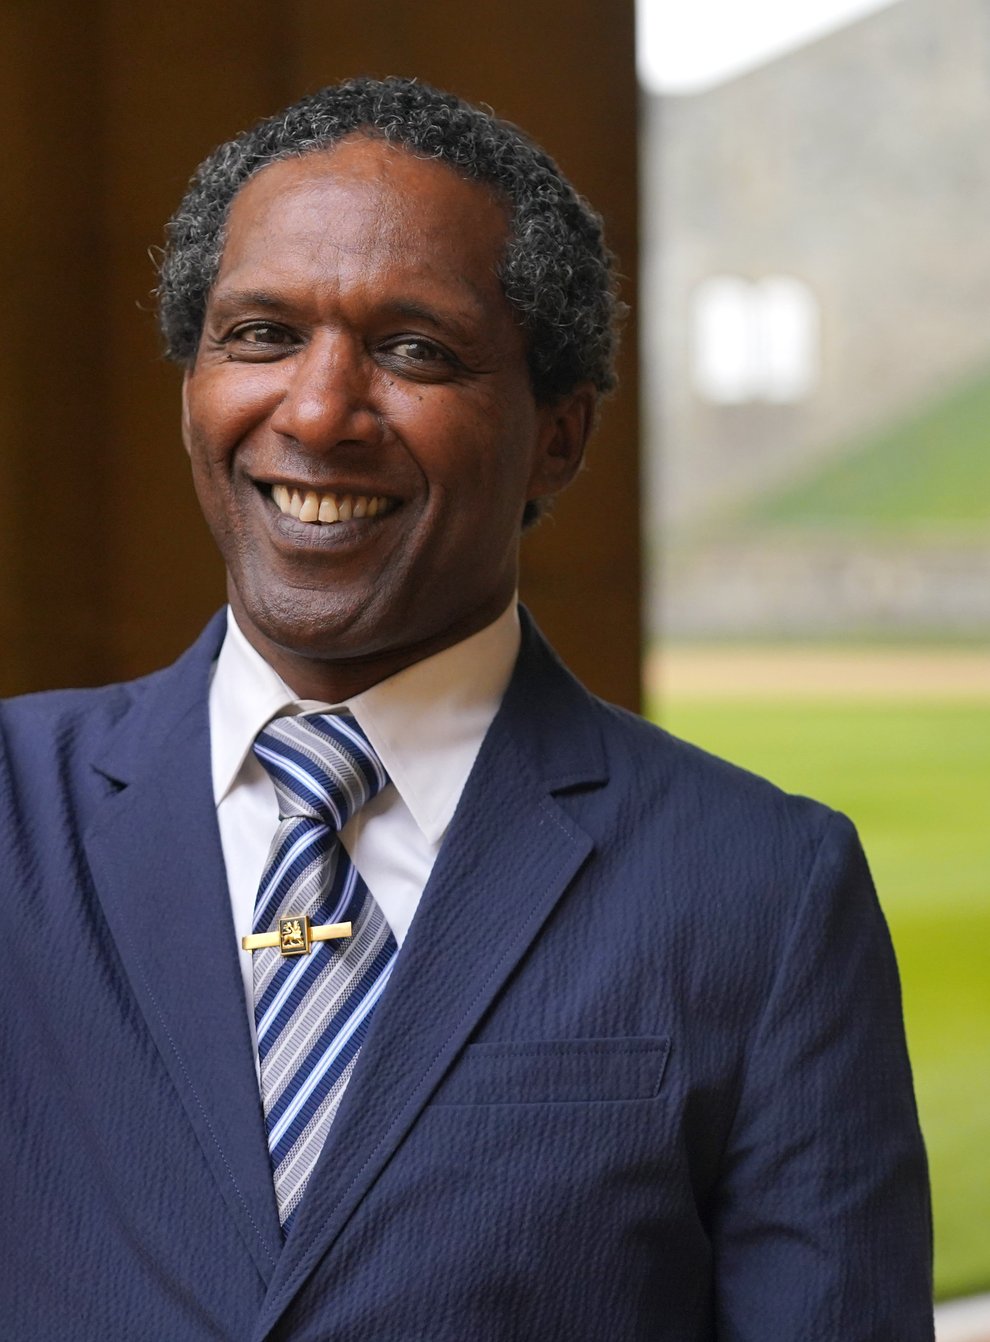 Lemn Sissay after being made an OBE (Officer of the Order of the British Empire) by the Prince of Wales during an investiture ceremony at Windsor Castle (Jonathan Brady/PA)